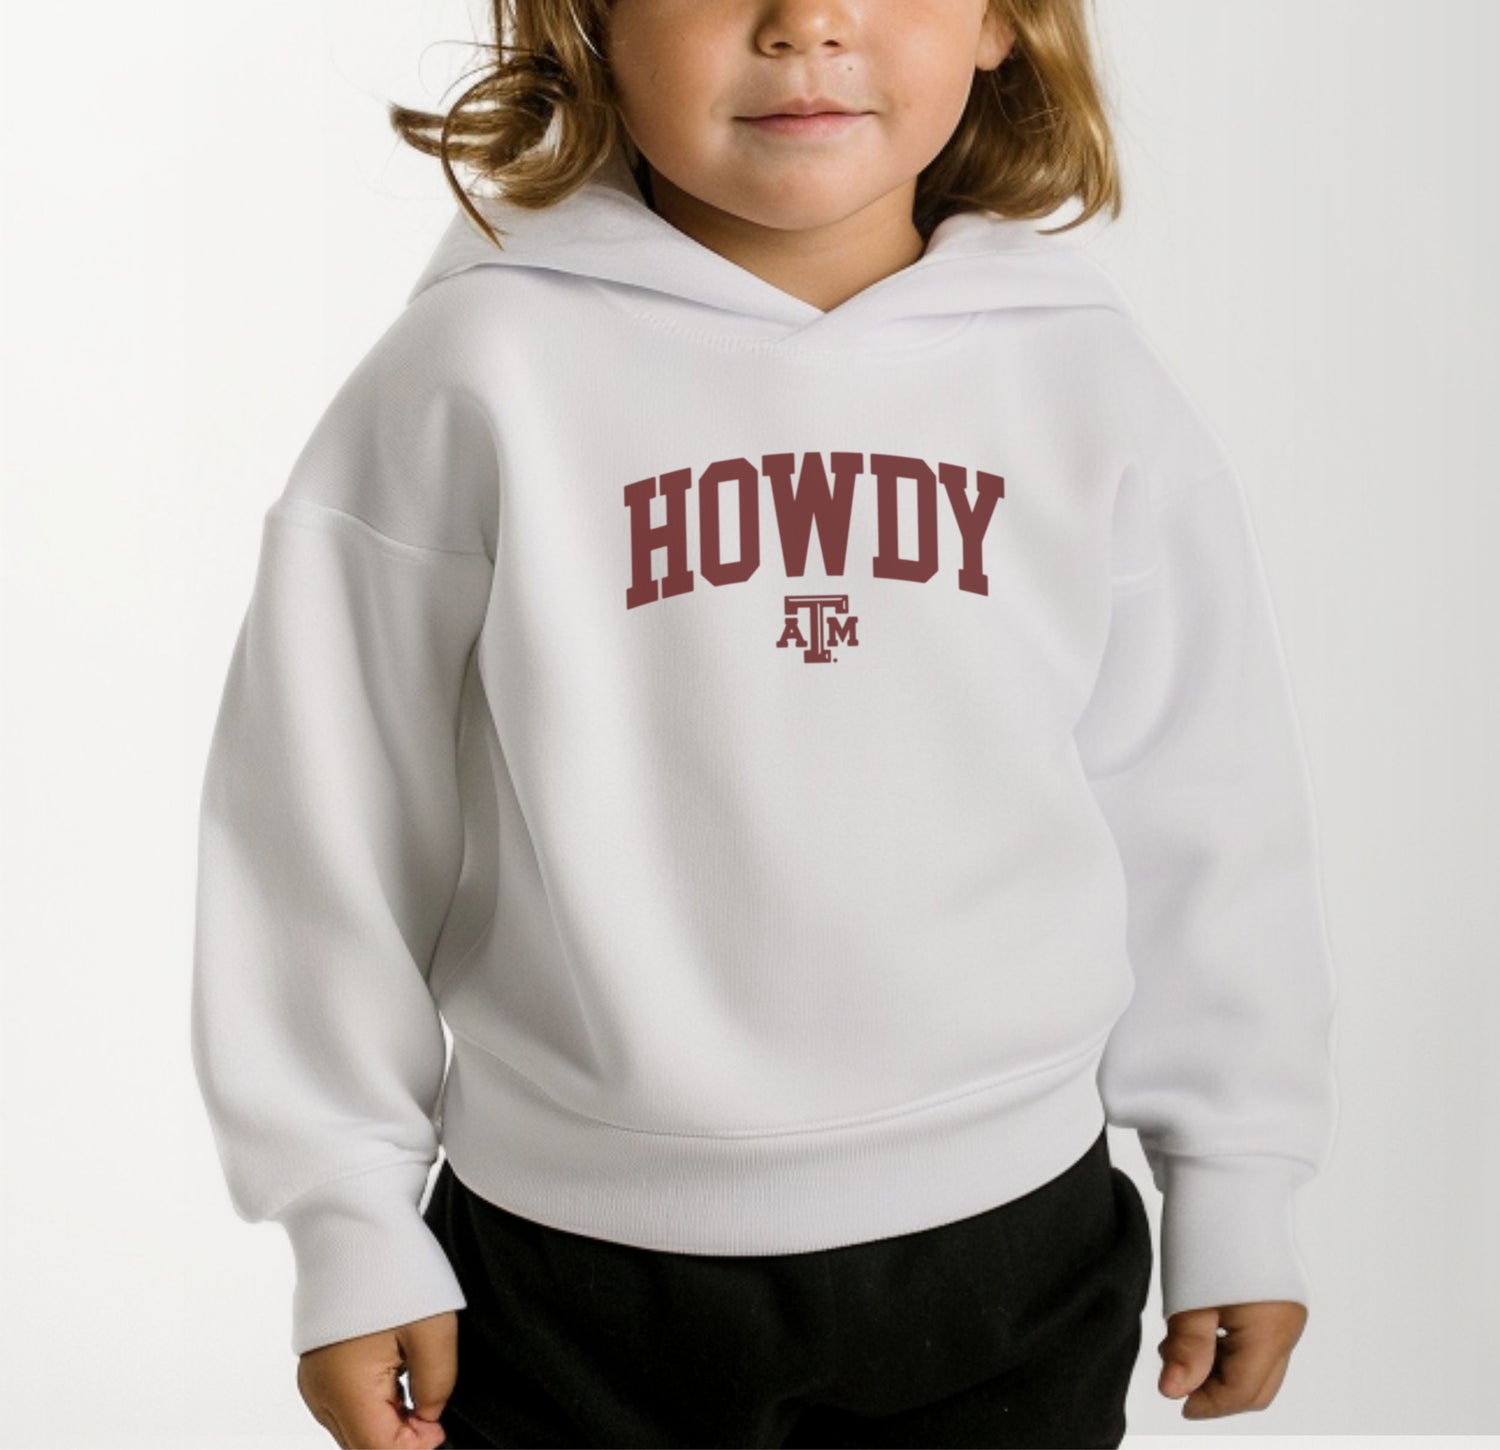 A model wears the White Toddler Unisex Texas A&M Howdy Varsity Hooded Sweatshirt.  The ﻿Texas A&M Howdy Varsity﻿ graphic is in bold Maroon in a Collegiate style.